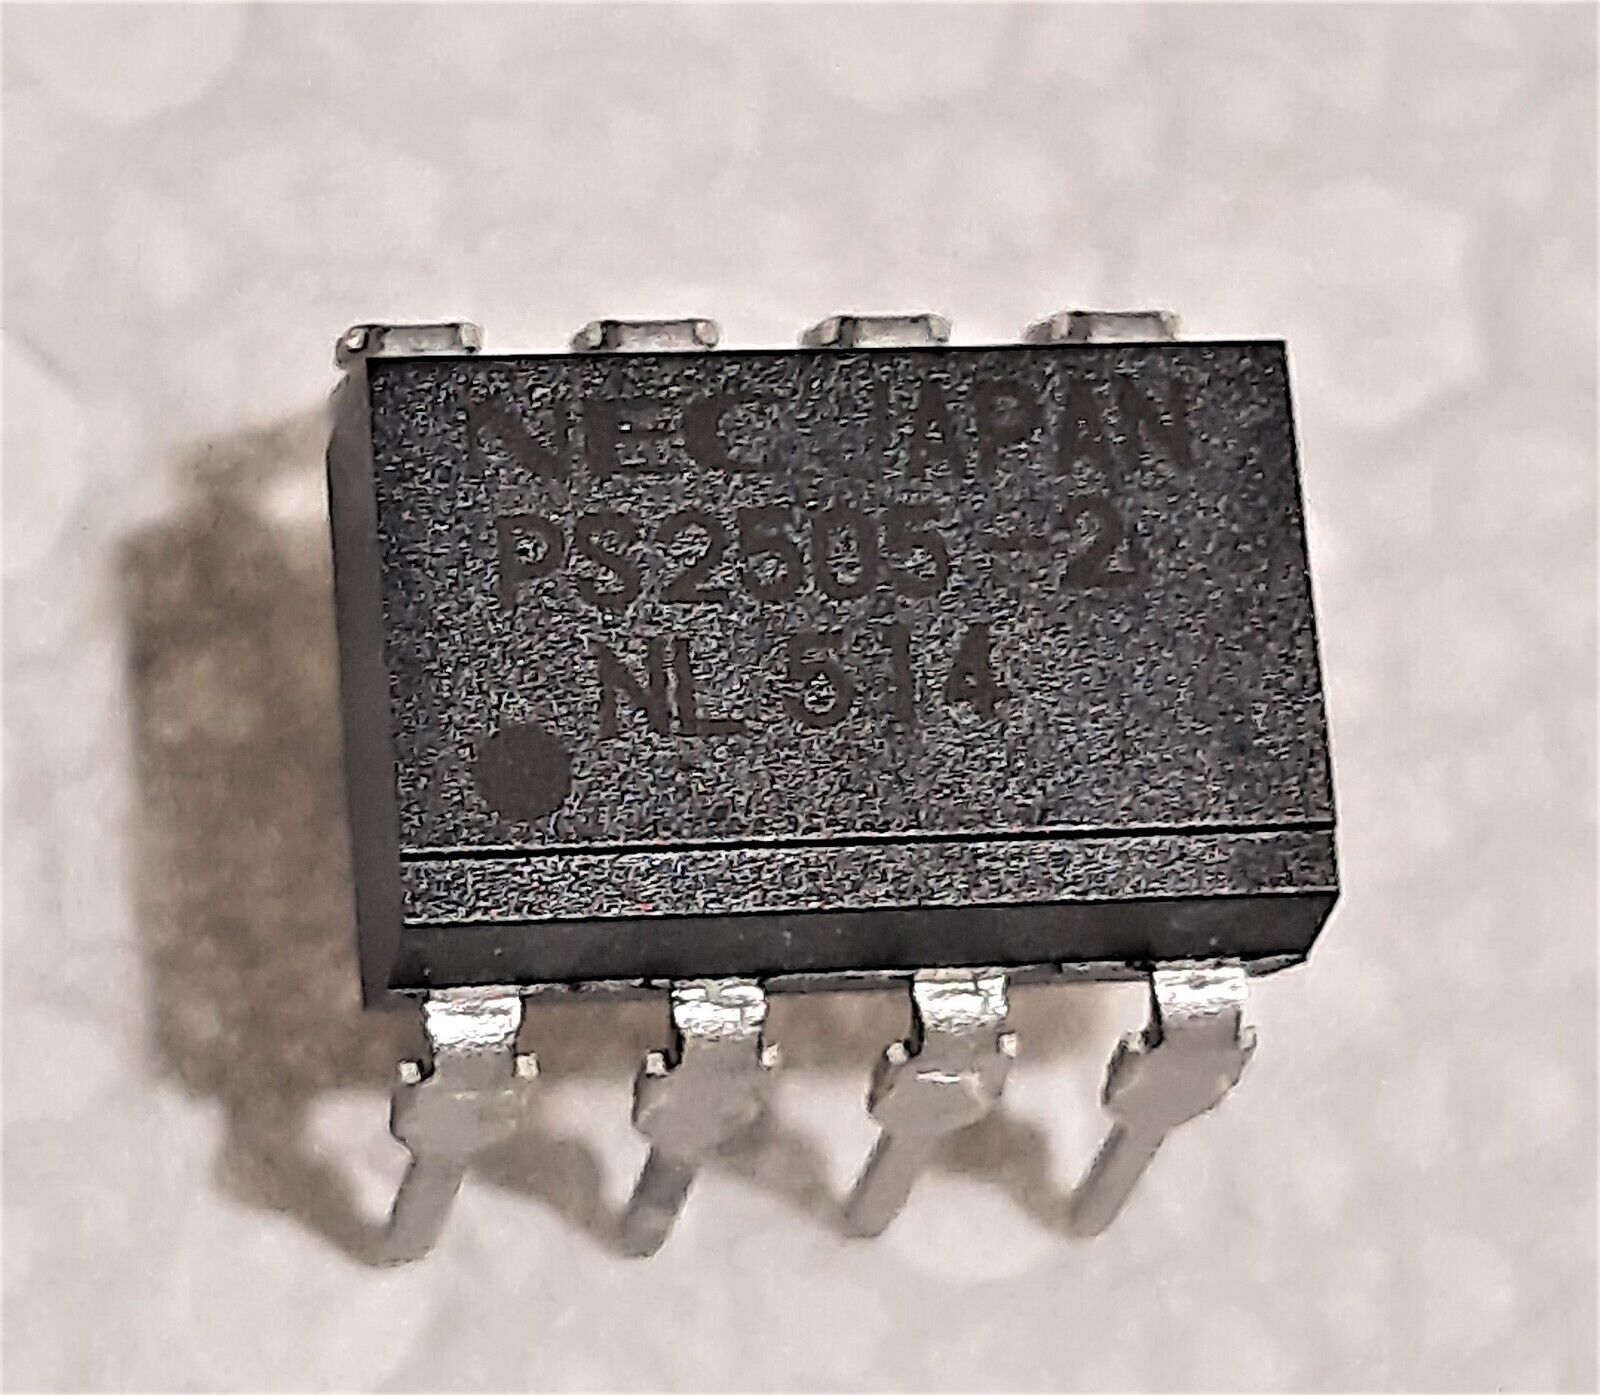 2-pieces of NEC PS2505-2 High Voltage 2-channel Optocoupler in an 8-Pin DIP